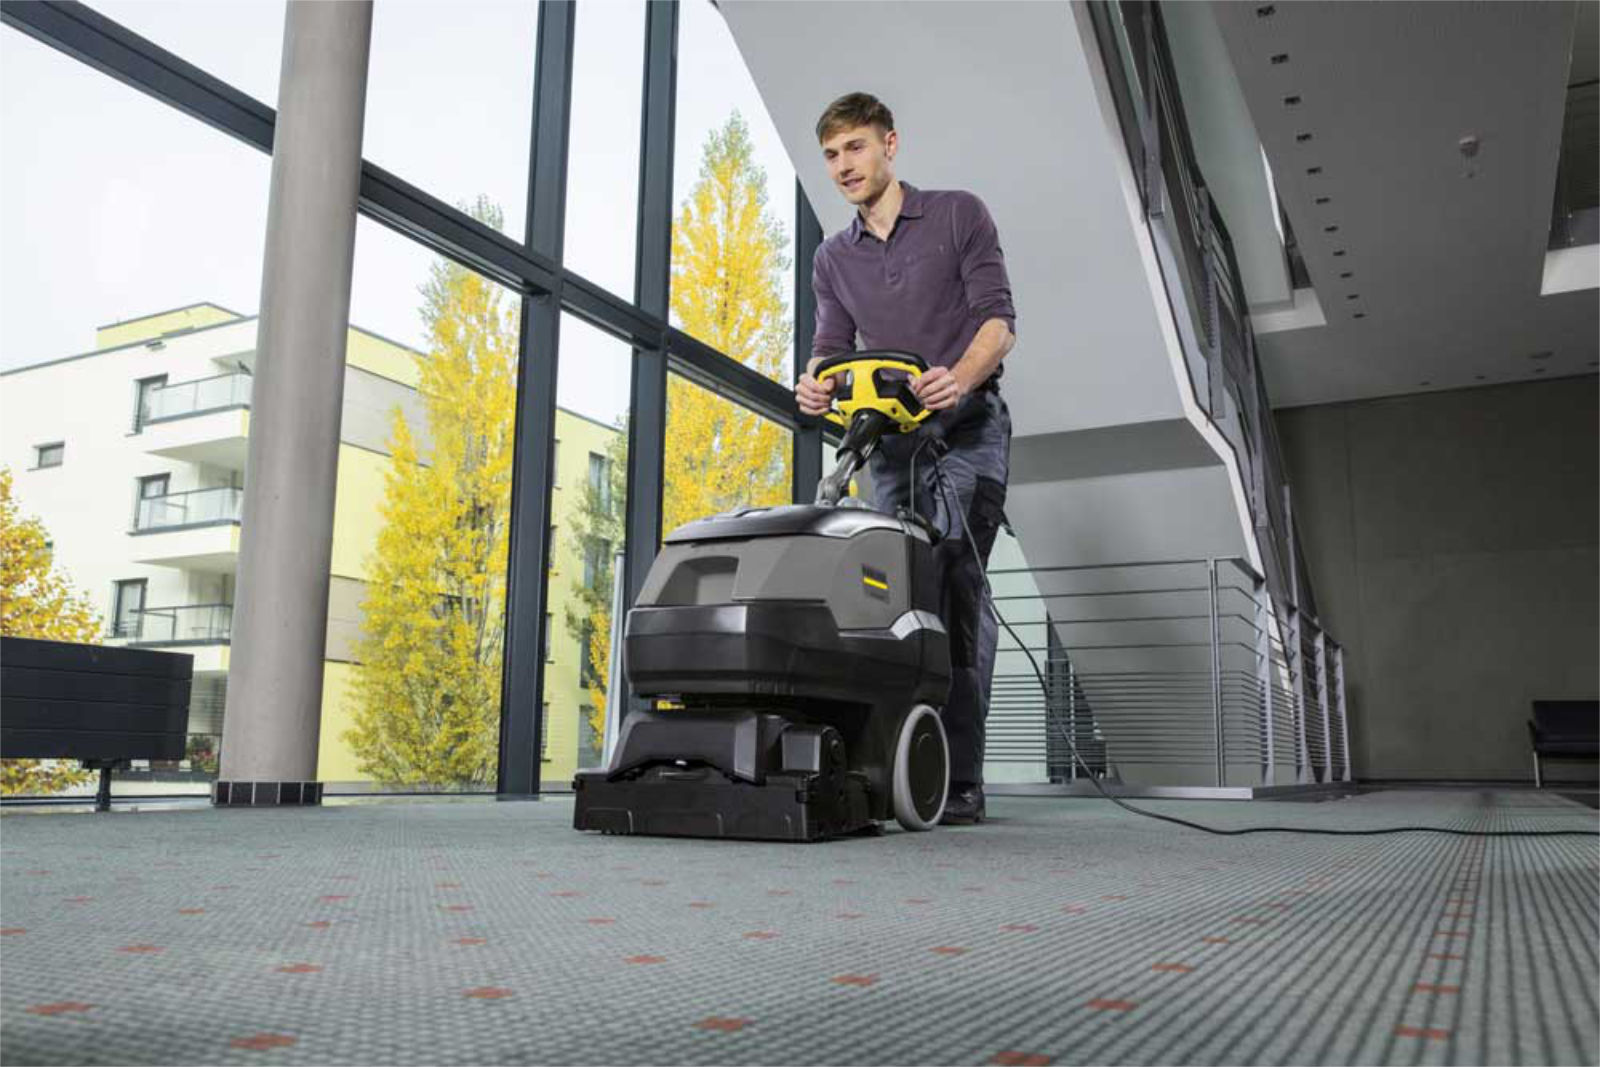 Office cleaning by a Karcher carpet extractor